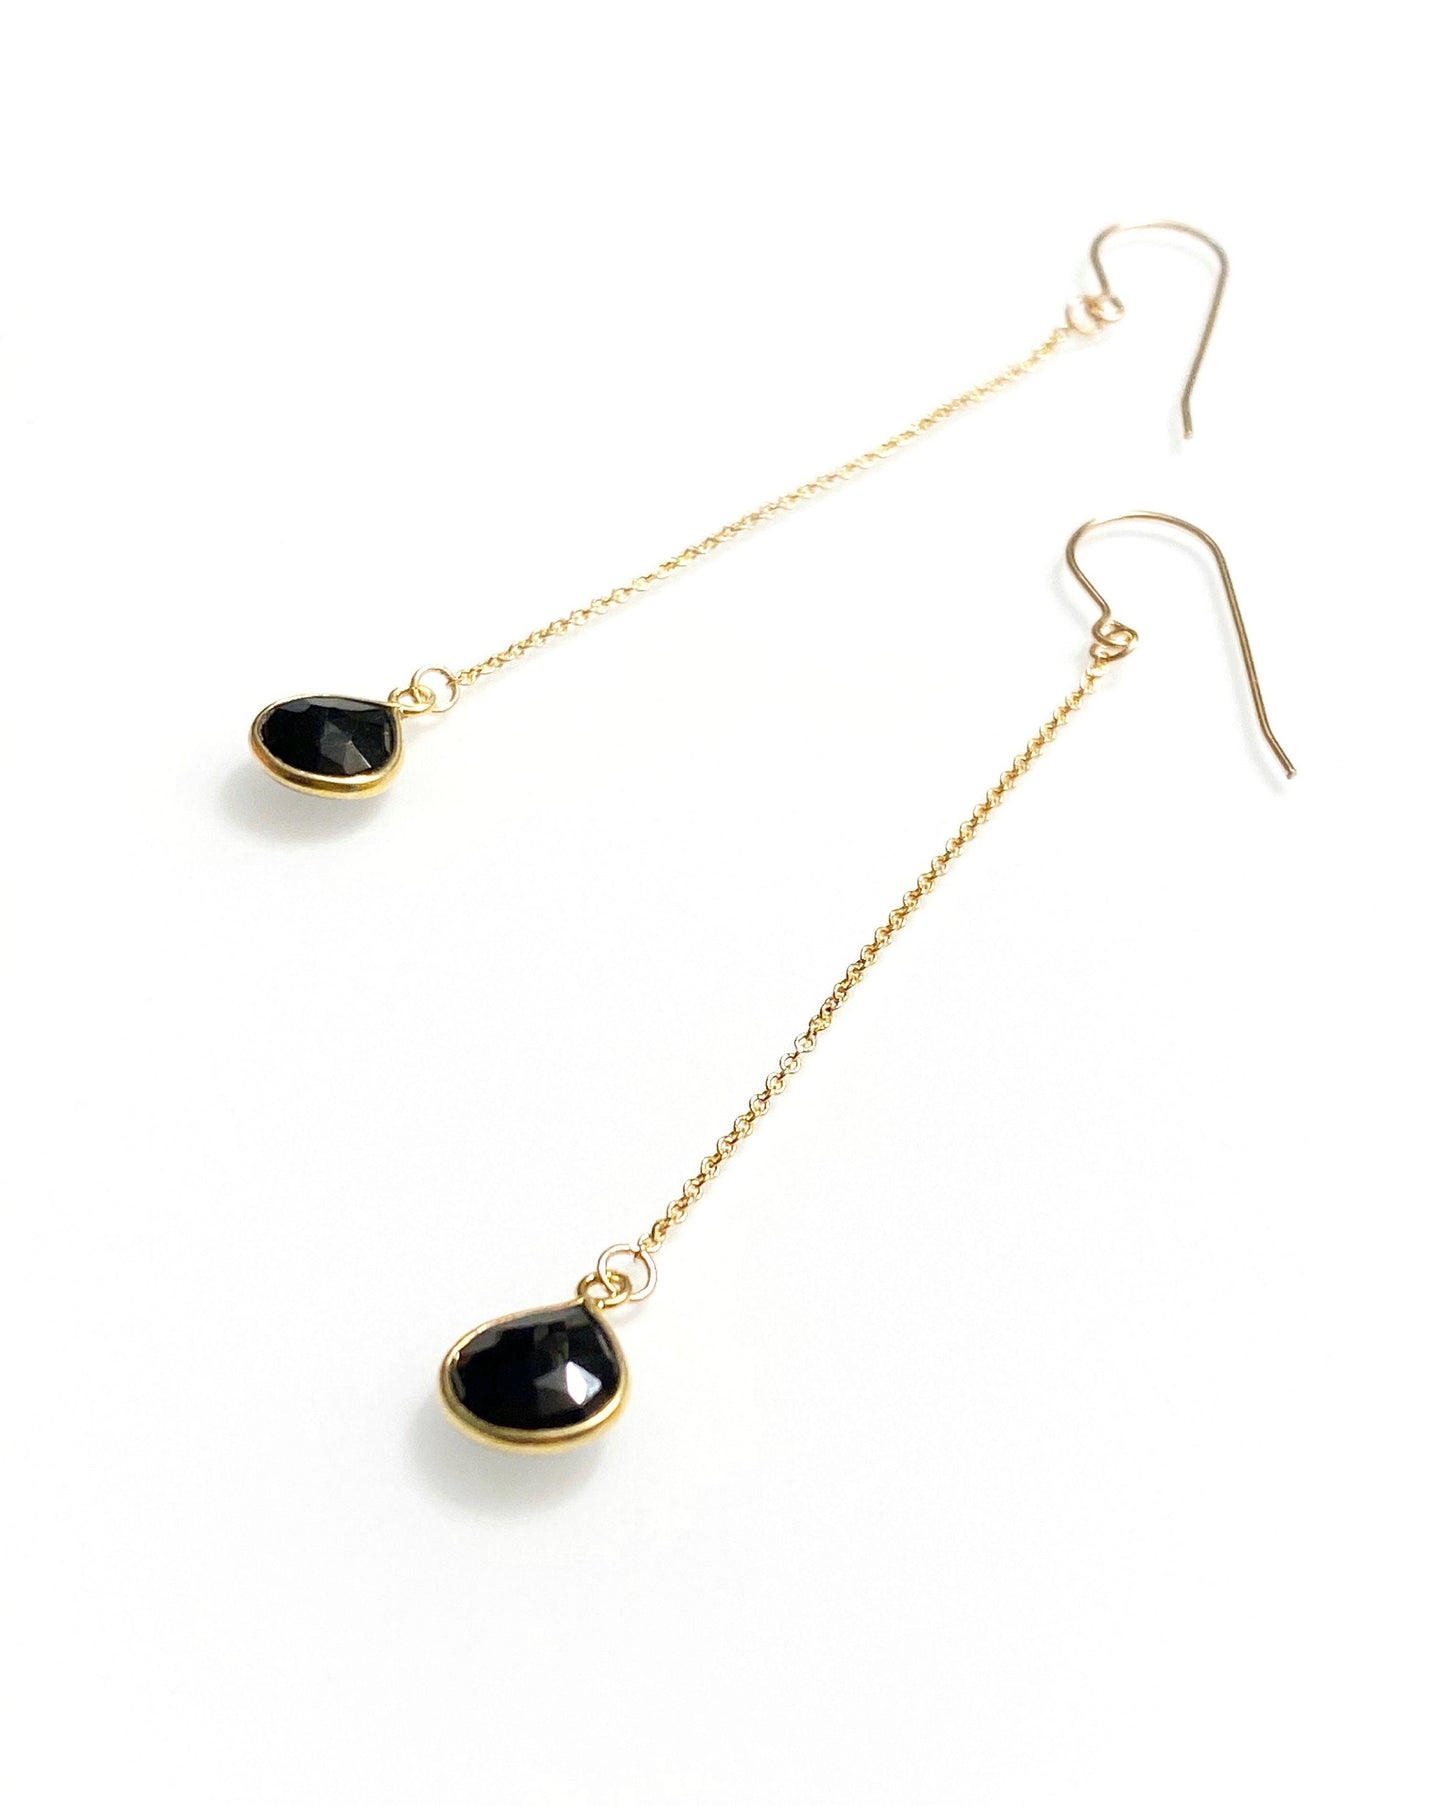 Clear quartz, emerald, chocolate moonstone, Dendrite opal, or onyx drop earrings (14kt gold-filled and gold vermeille)